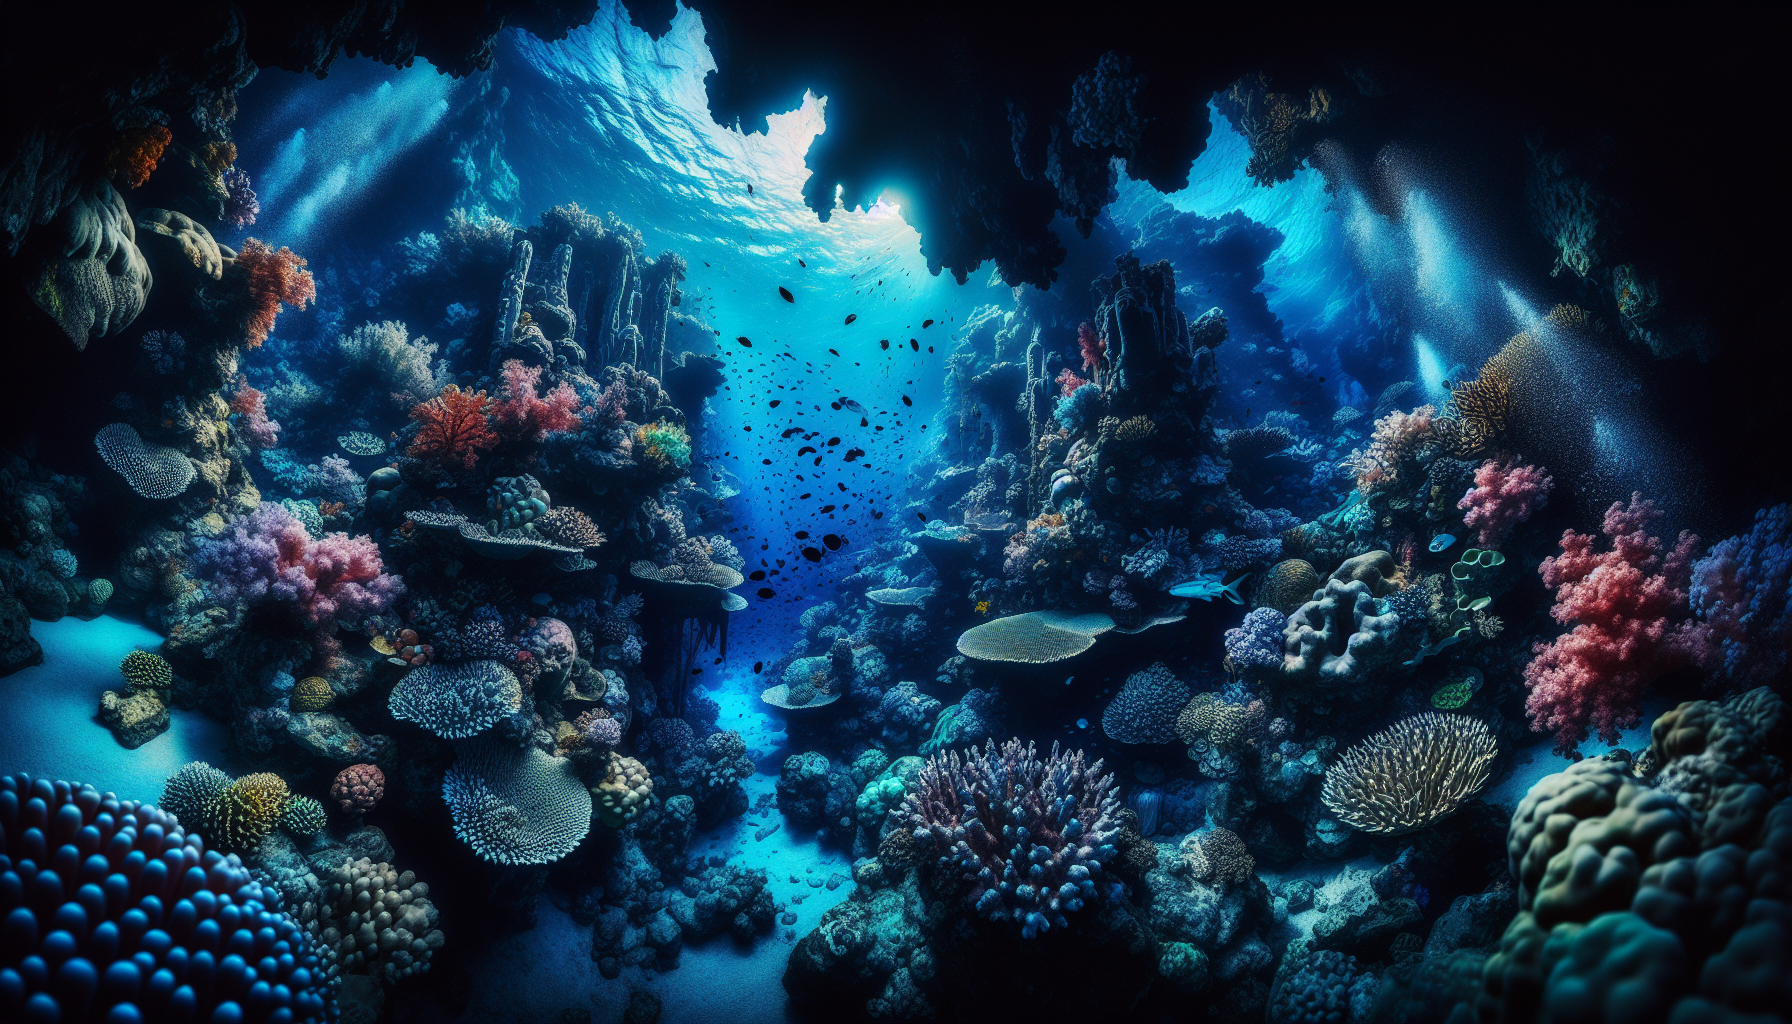 discover the mysterious secret wonders hidden in the depths of the red sea. uncover the breathtaking beauty of this underwater world.